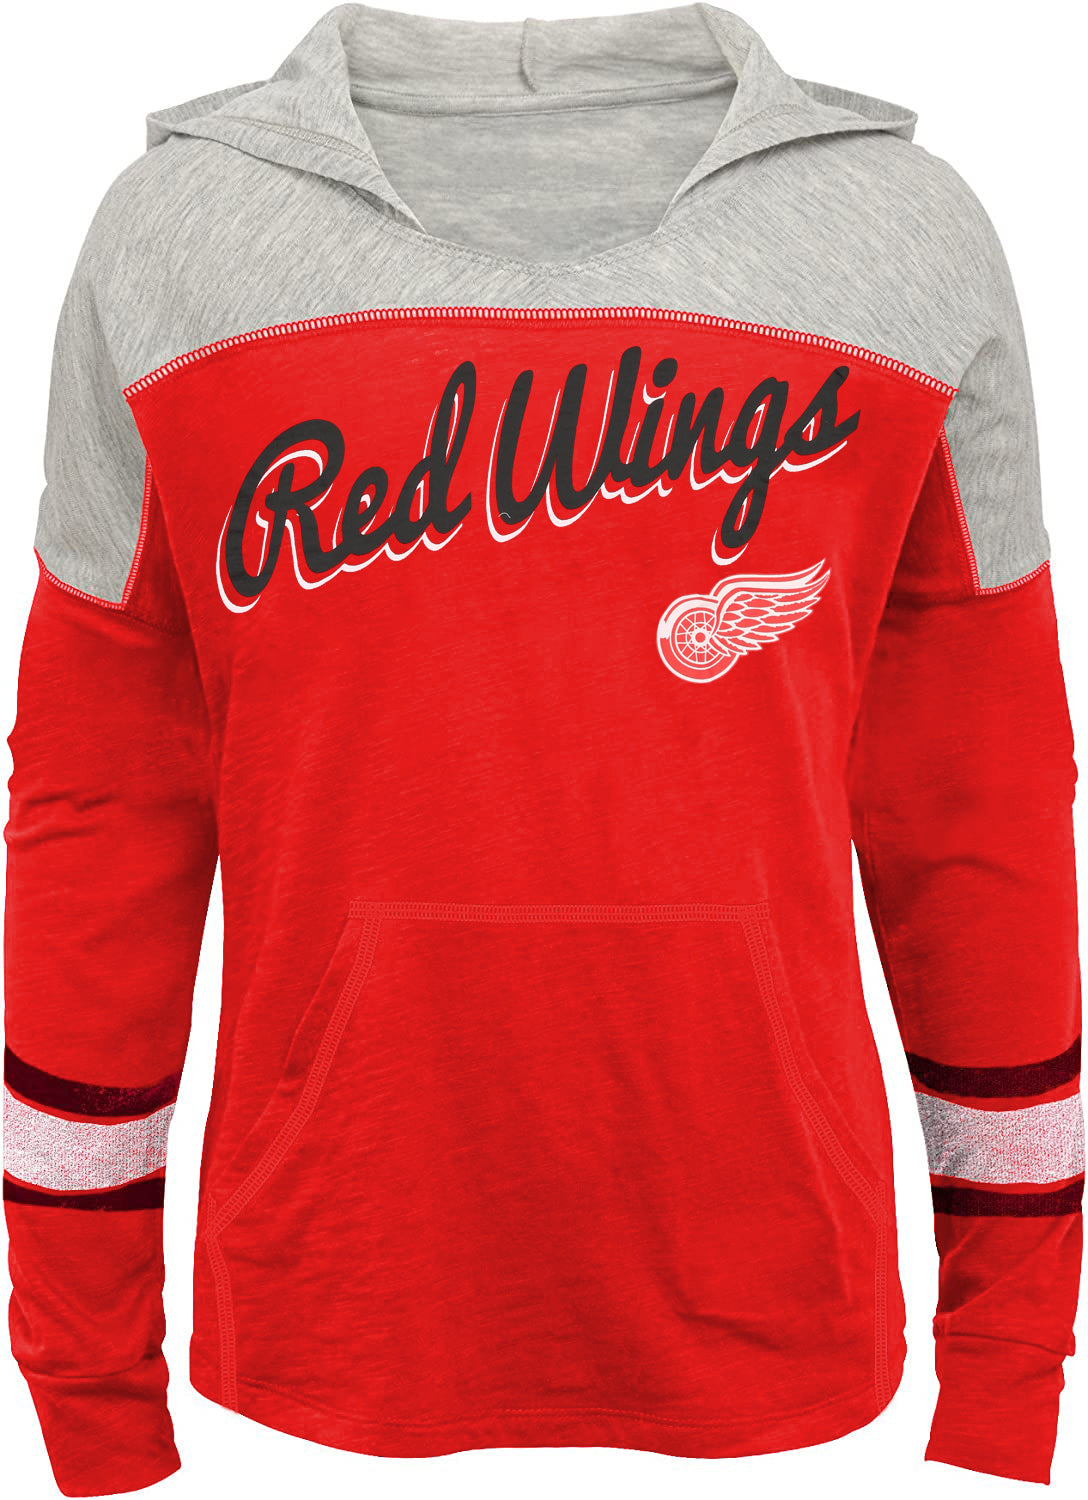 NHL boys Detroit Red Wings long sleeve t shirt size L 14/16